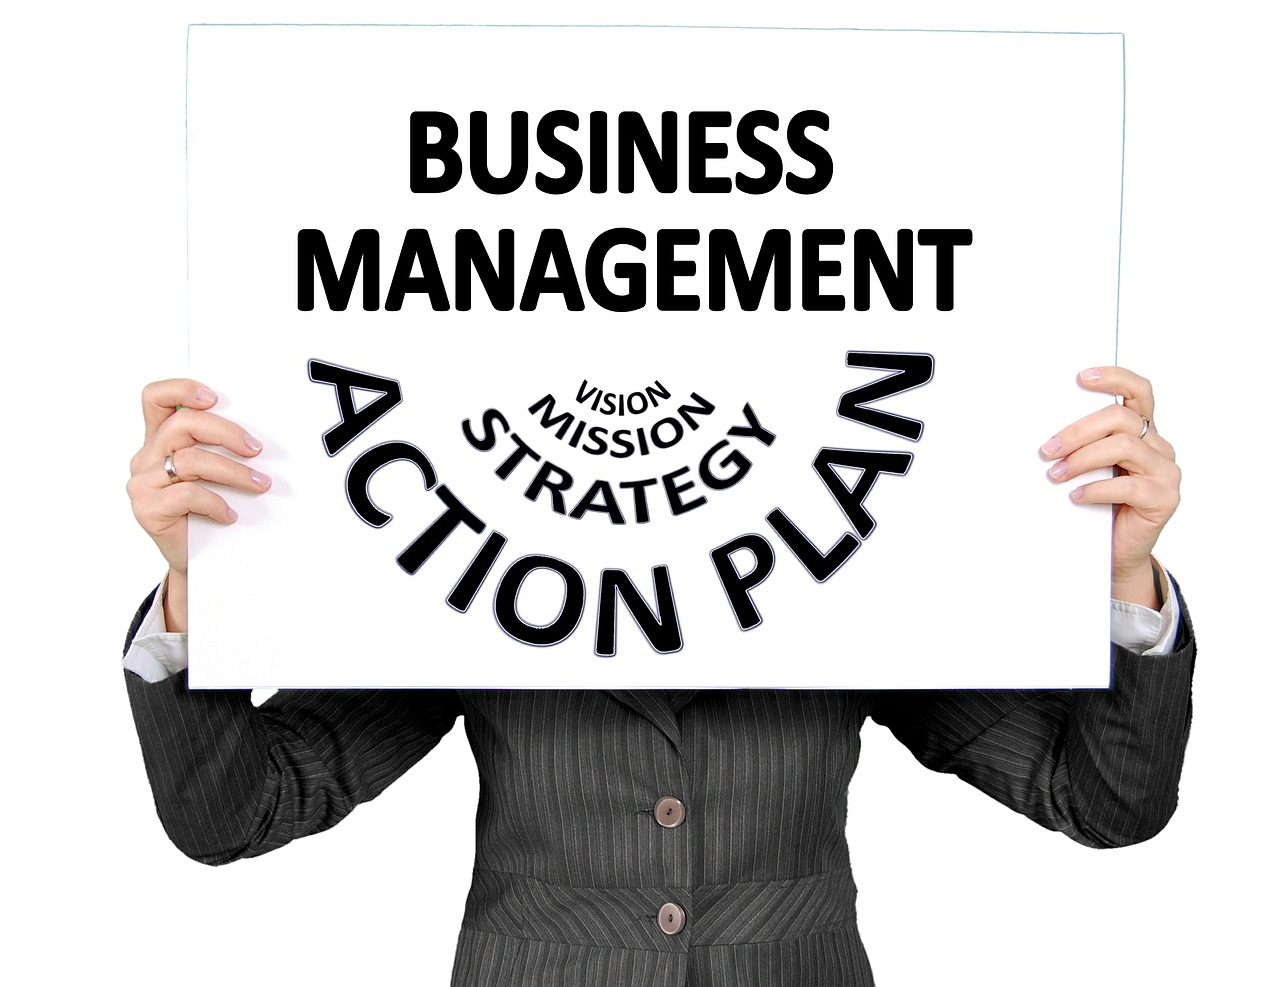 A woman holding up a sign that says, "Business Management vision, mission, strategy, action plan".